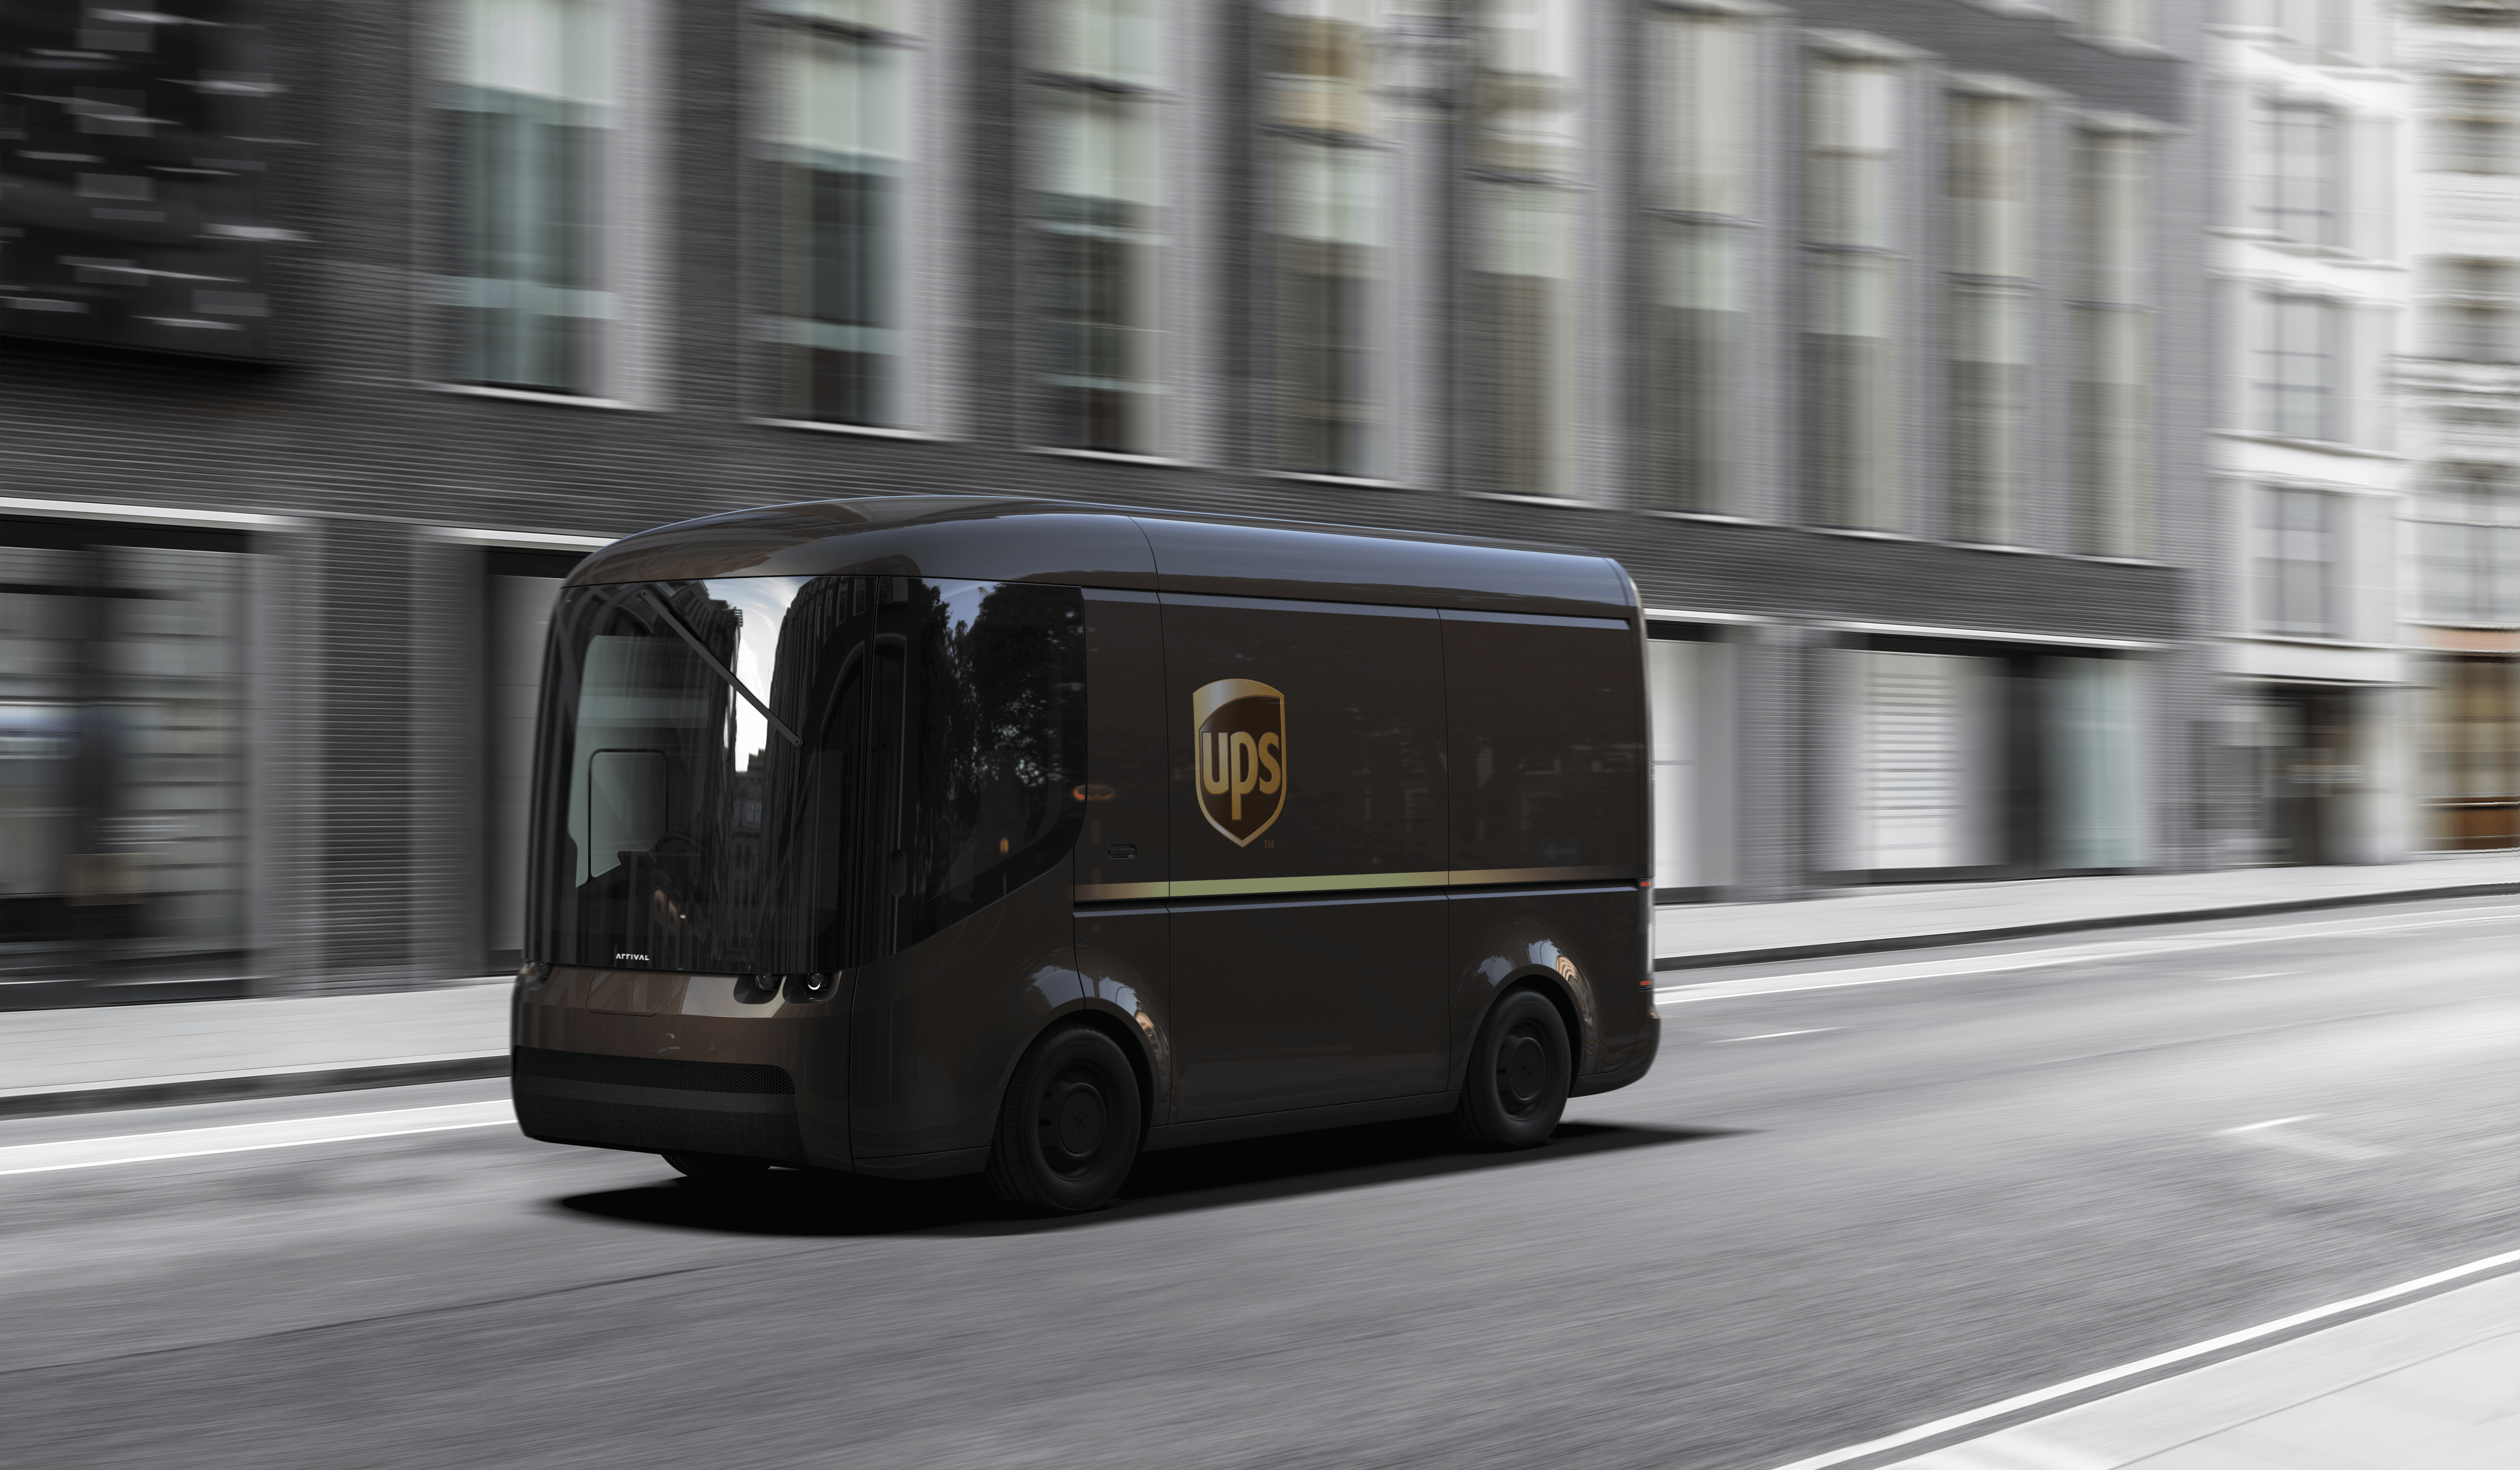 UPS is one of the firms Arrival has already worked with